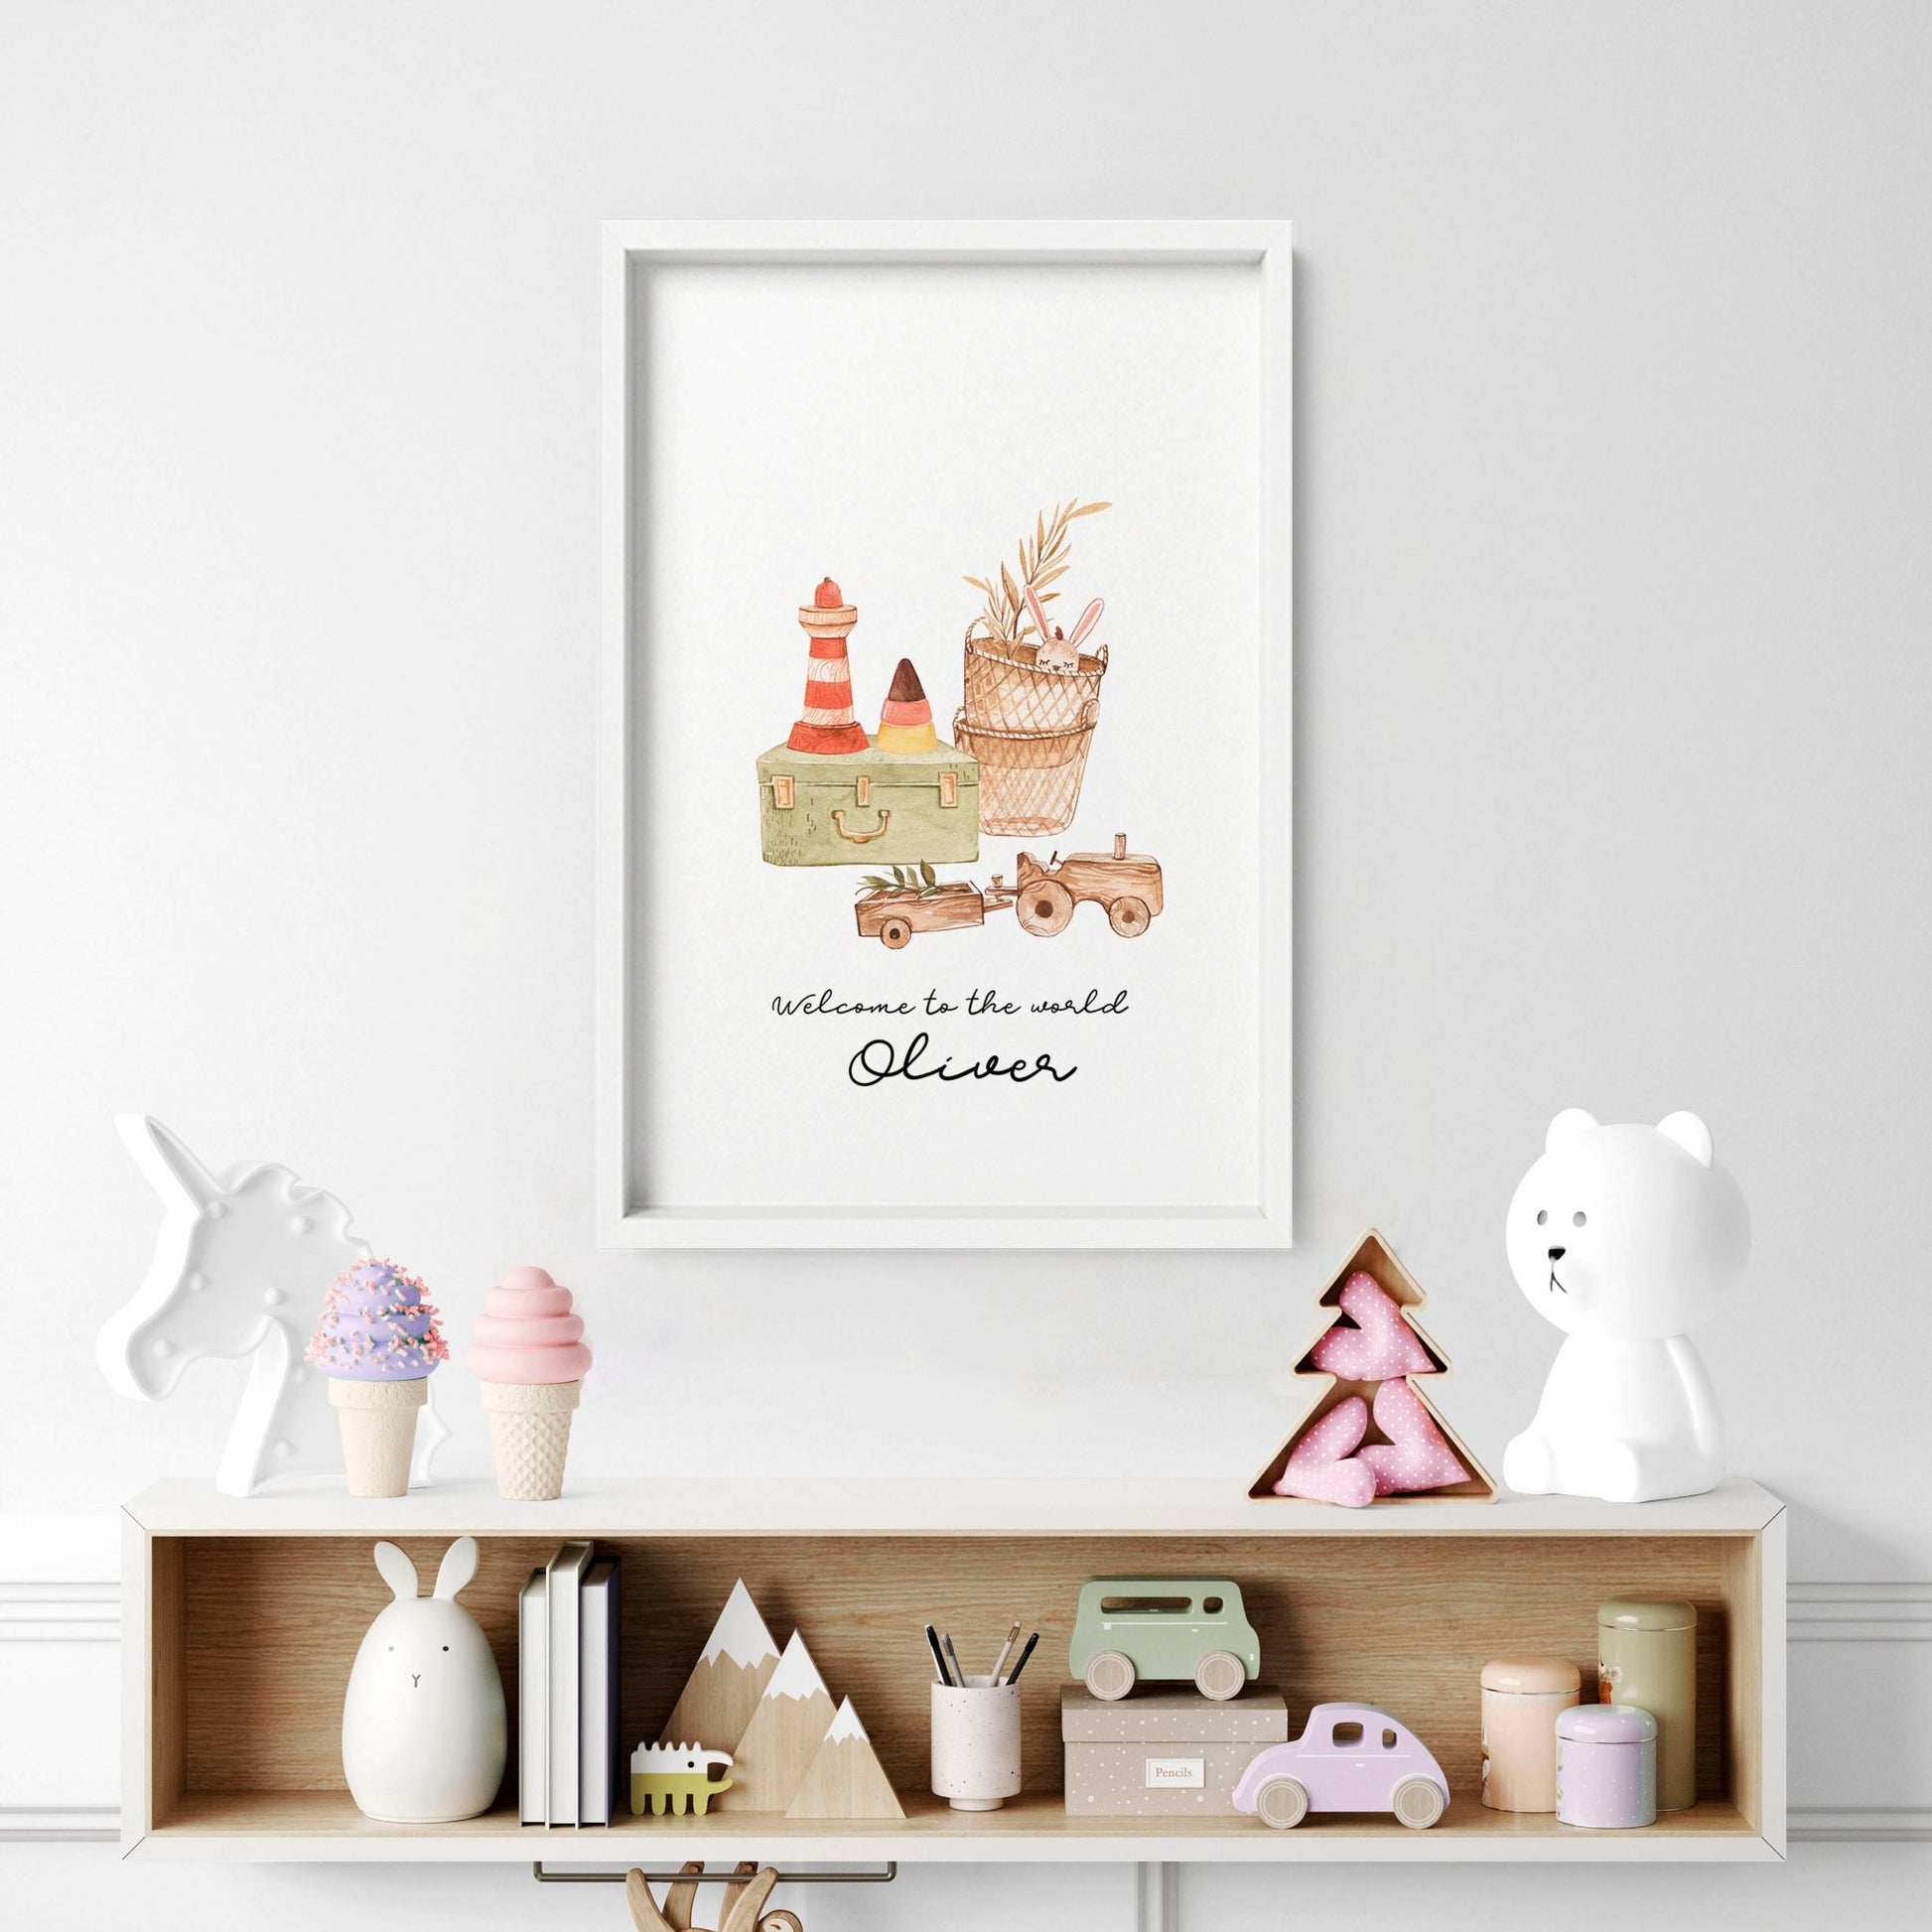 Playroom decor ideas | wall art print for baby boy room - About Wall Art